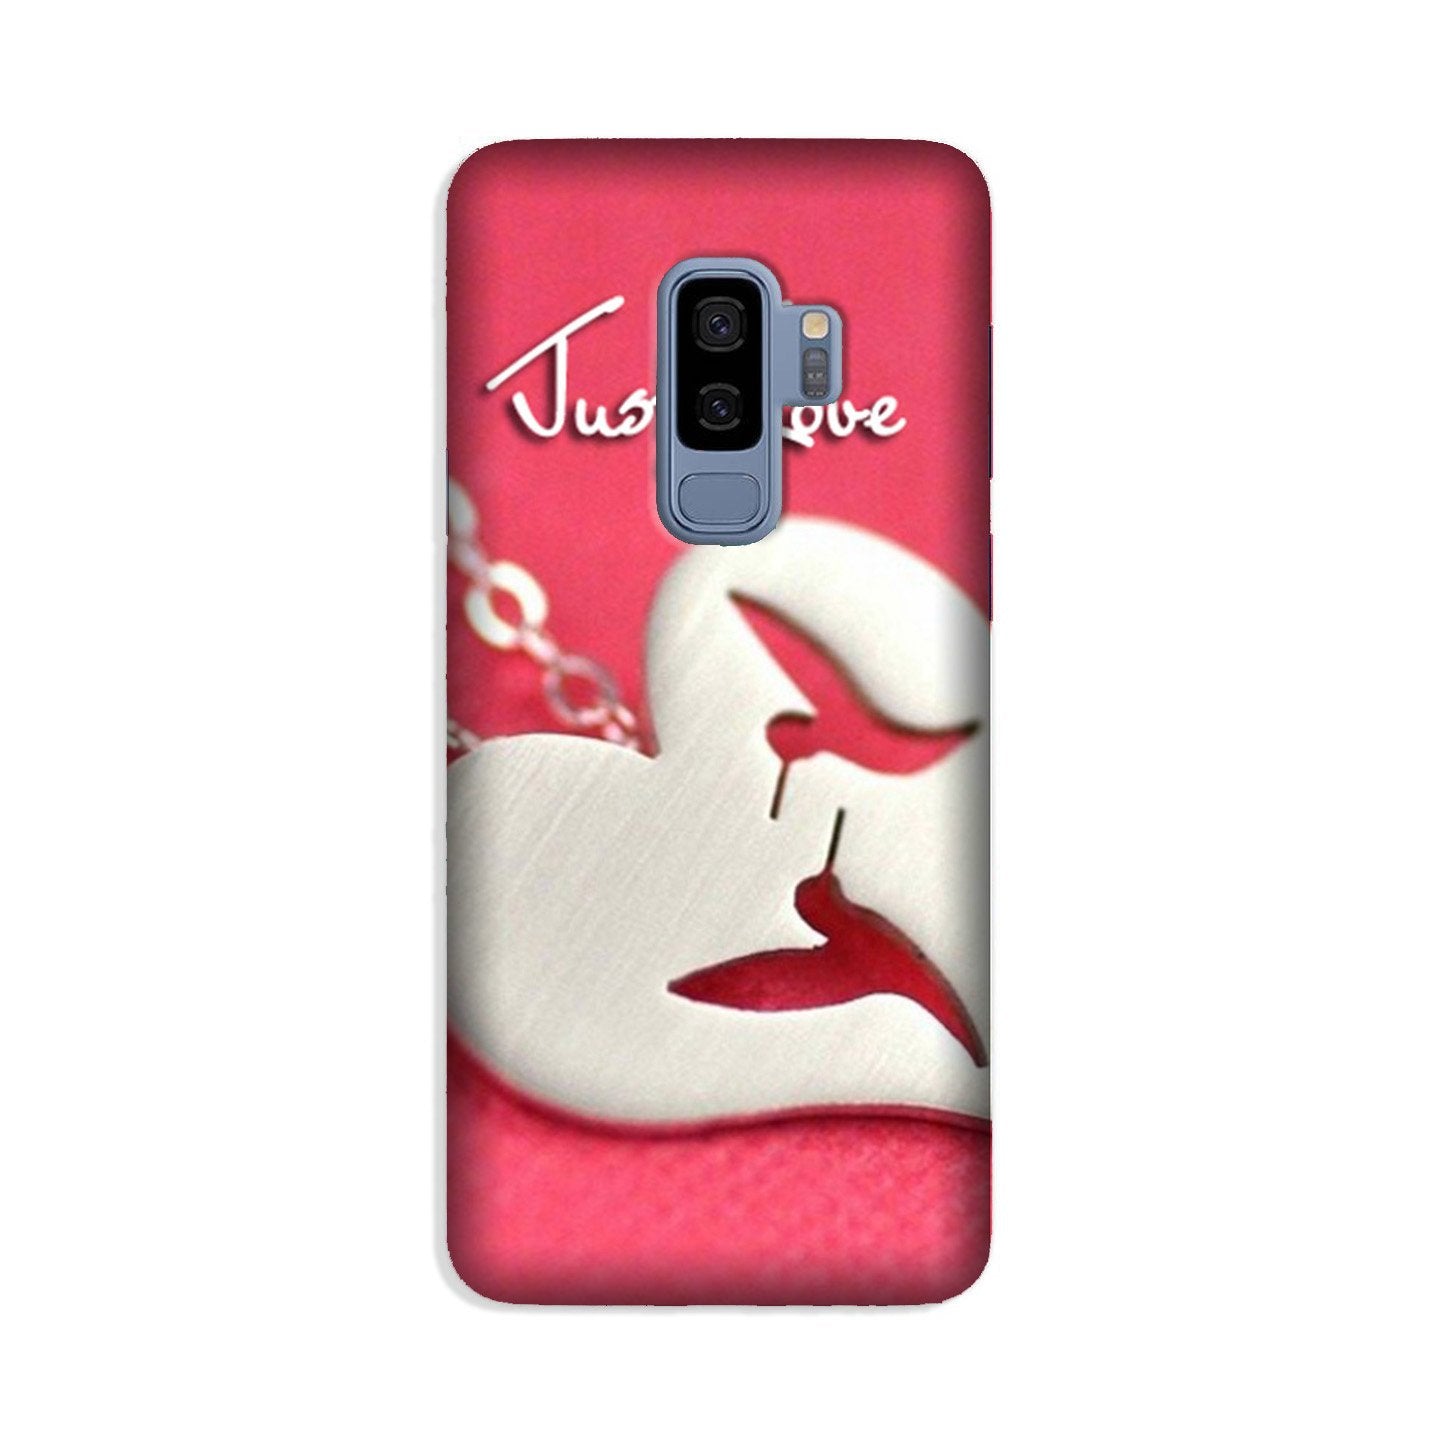 Just love Case for Galaxy S9 Plus